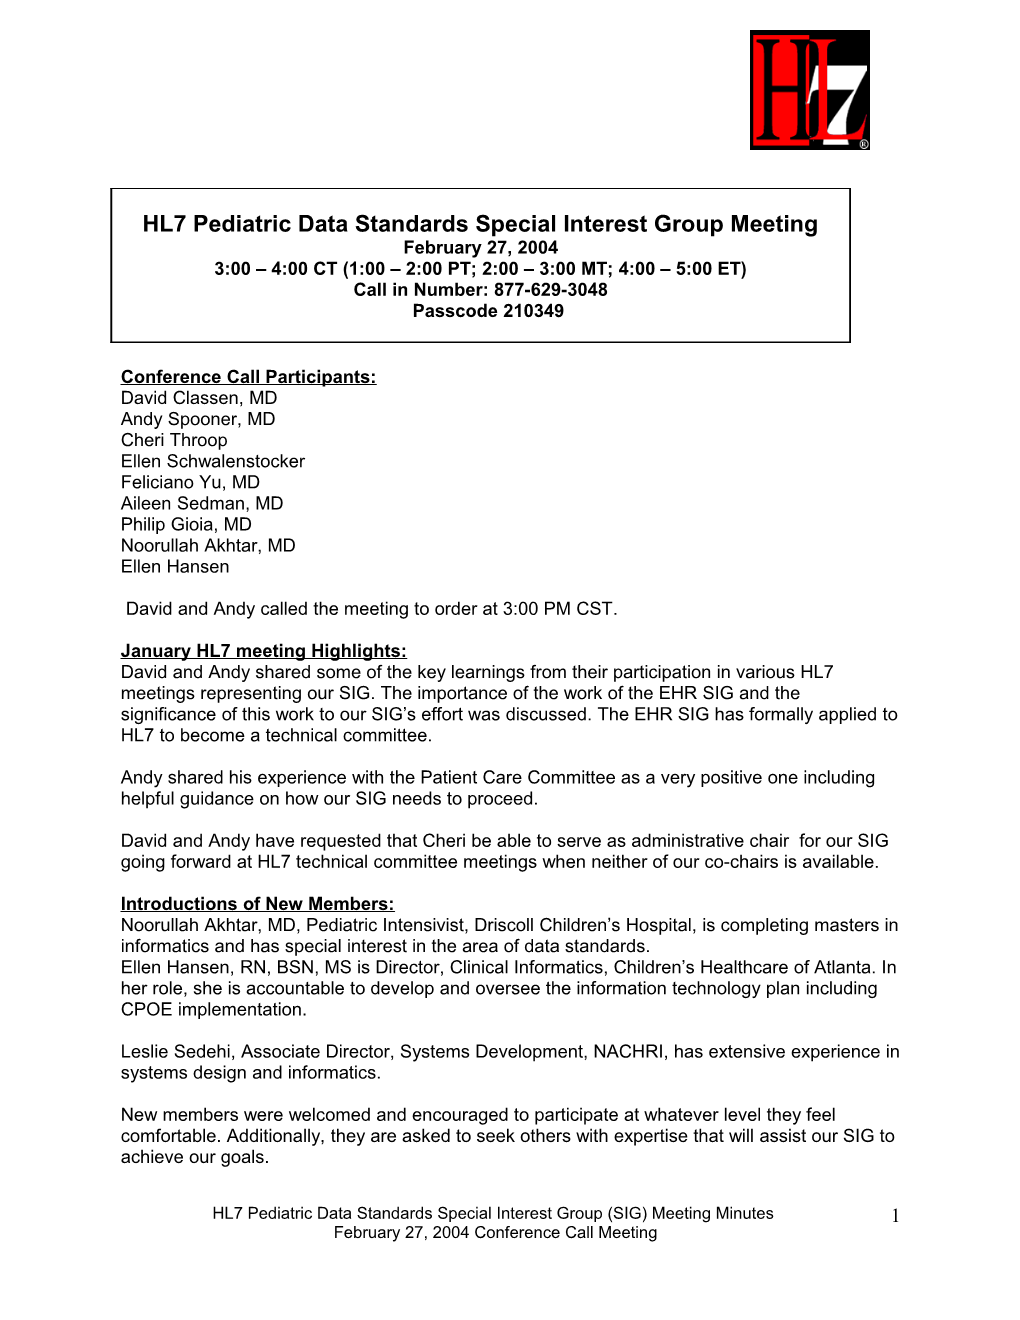 HL7 Pediatric Data Standards Special Interest Group Meeting